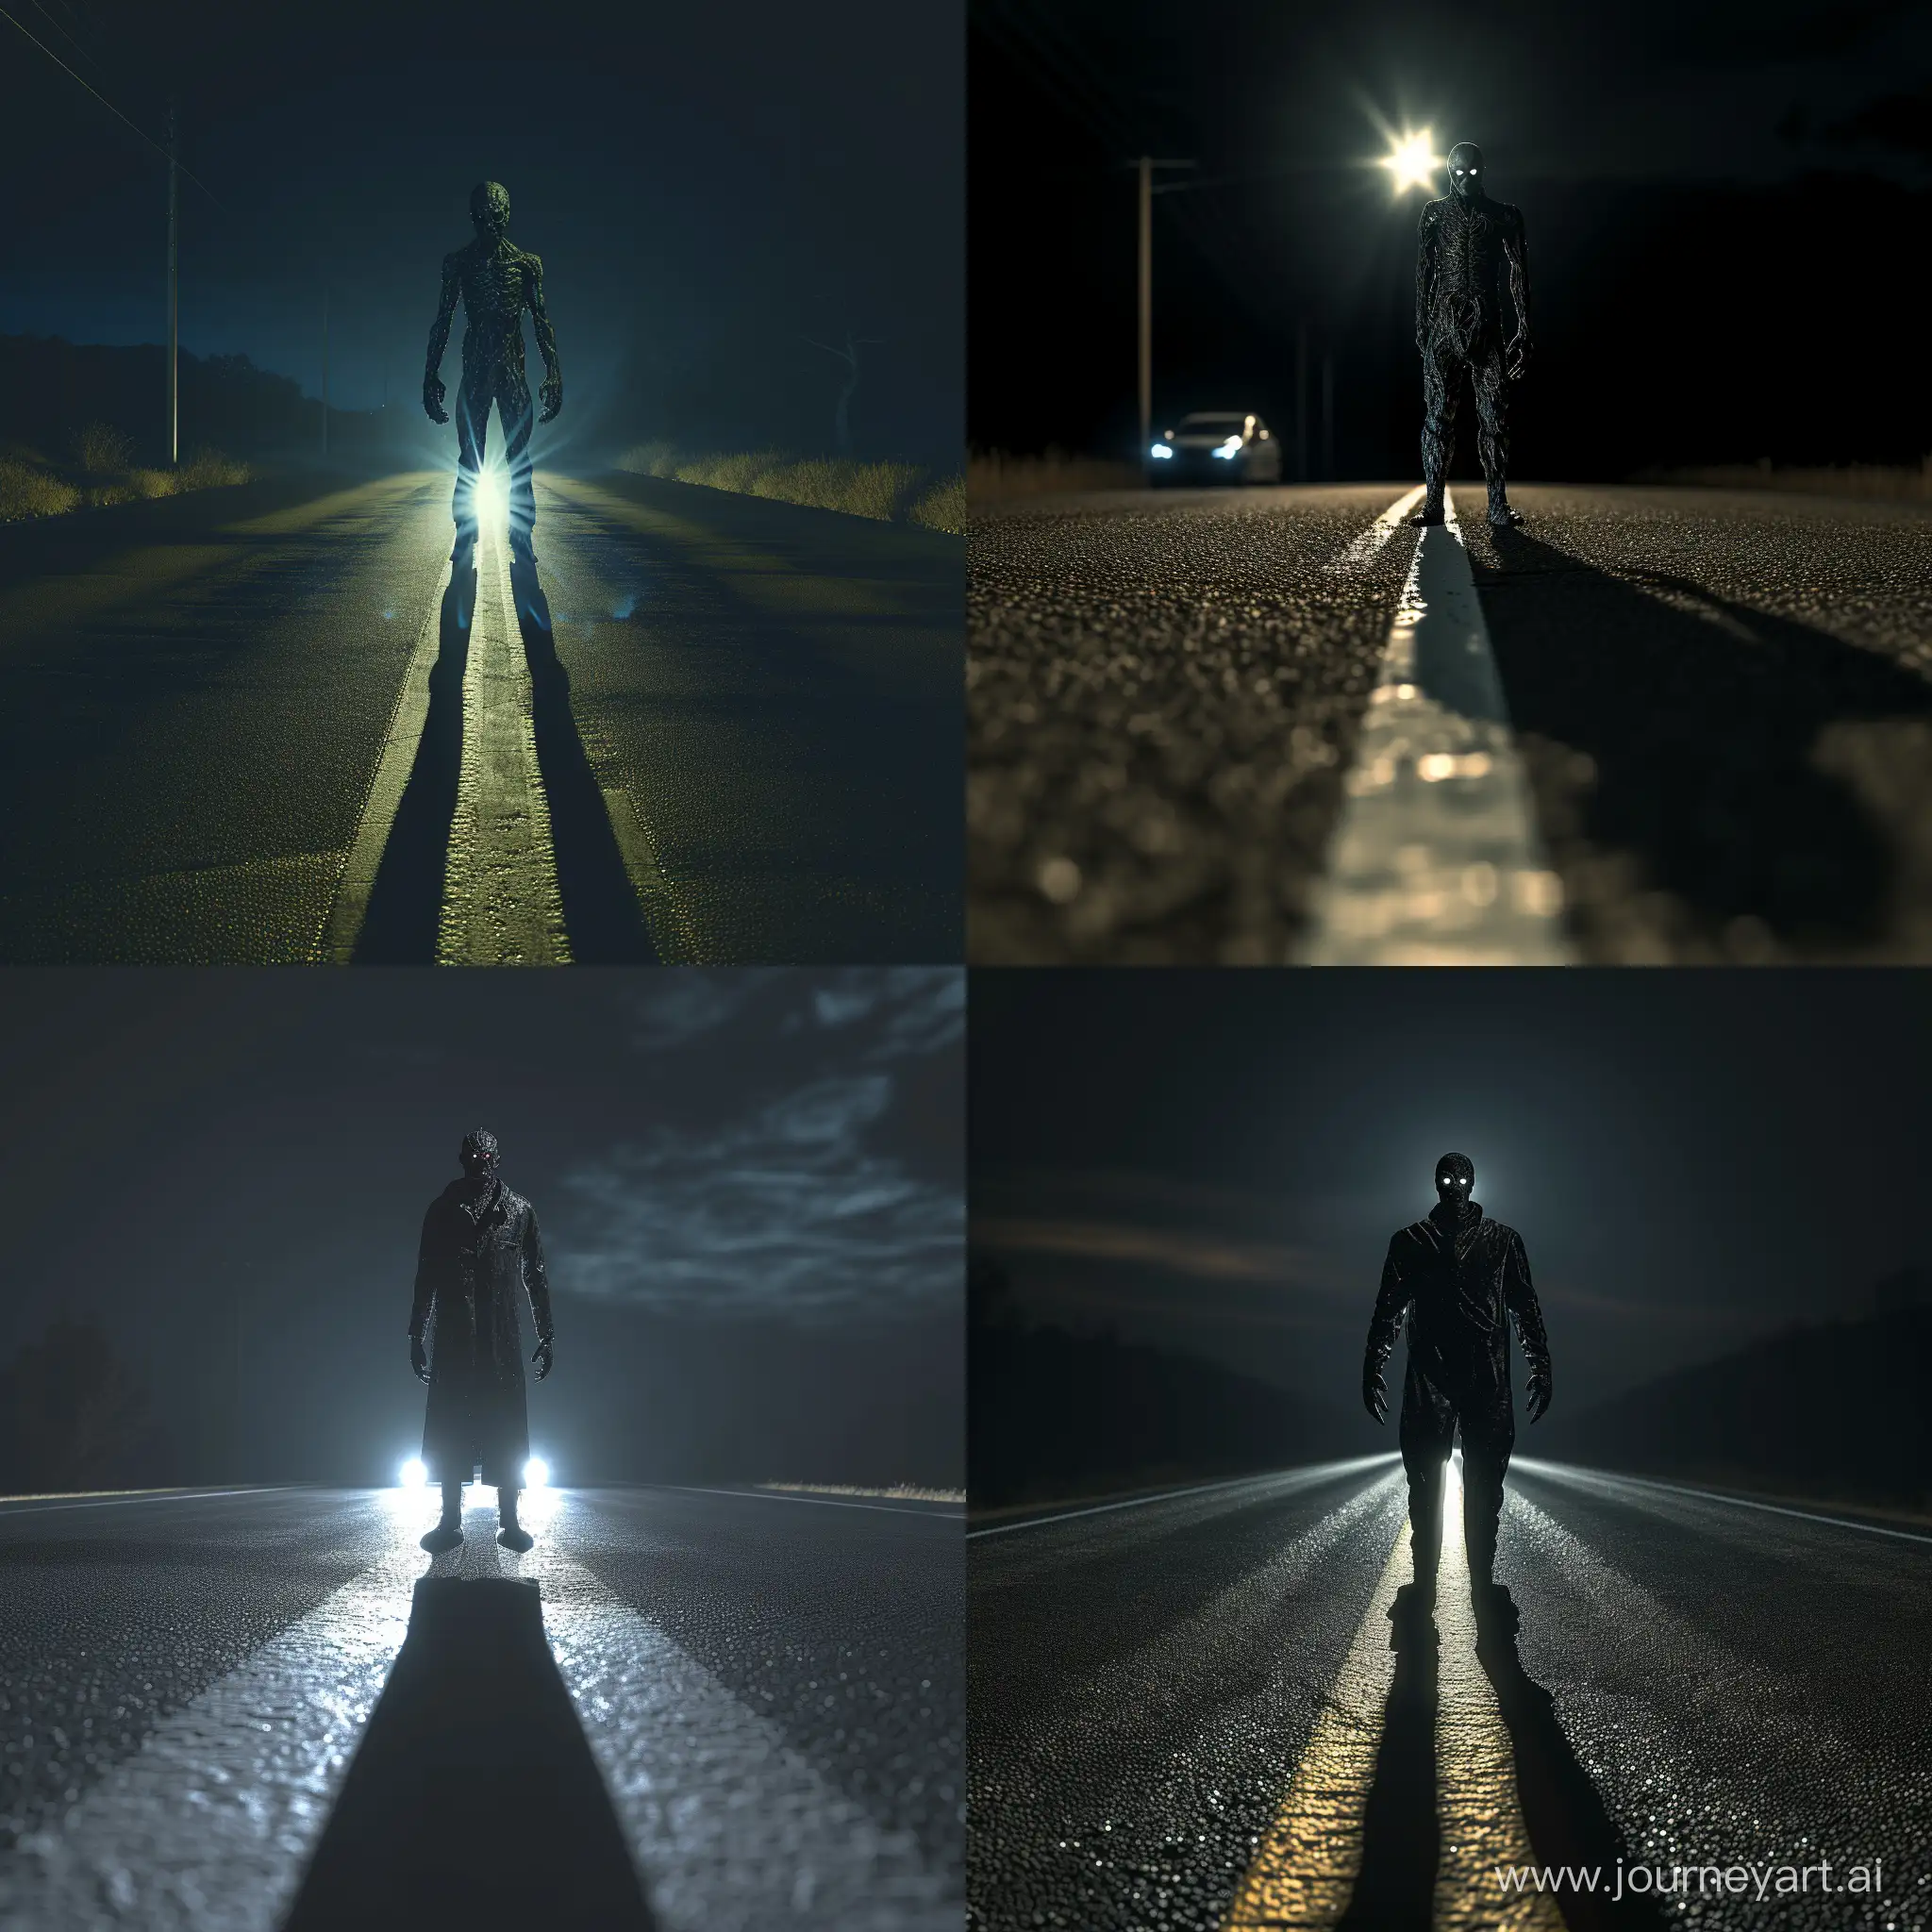 Jeepers-Creepers-Creeper-Stands-in-Road-Nighttime-Car-Encounter